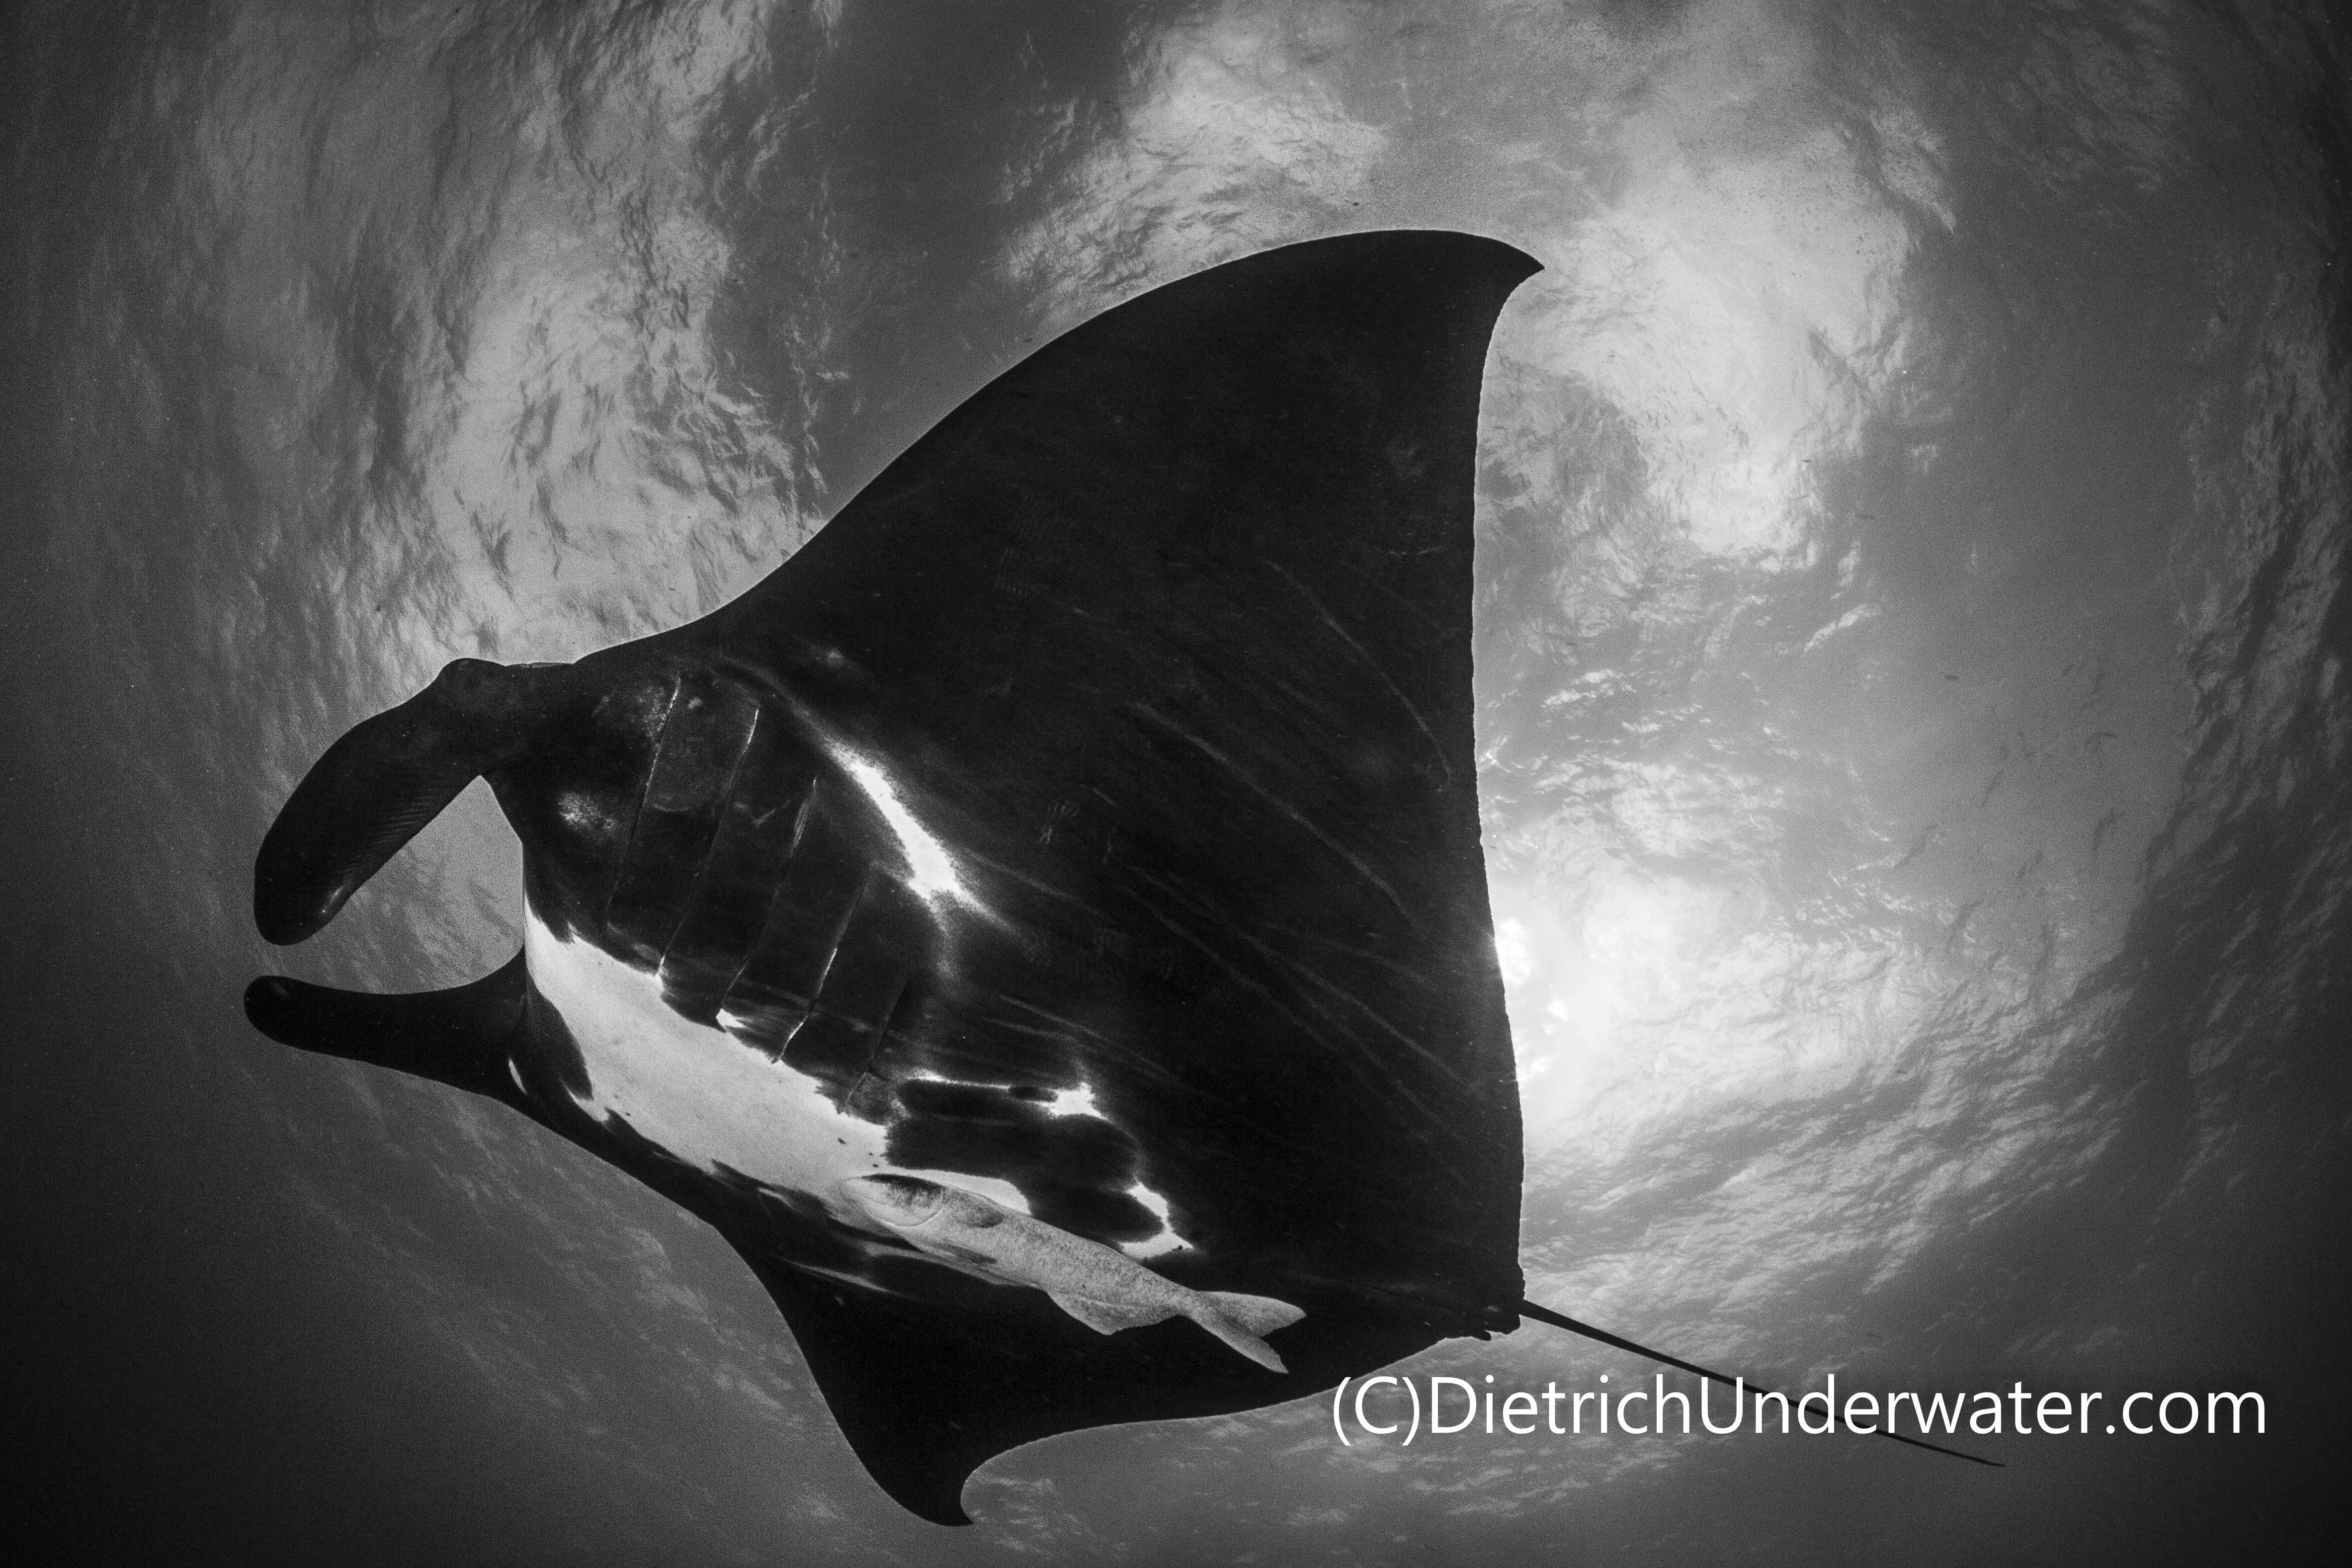 The Giant Mantas are real players!